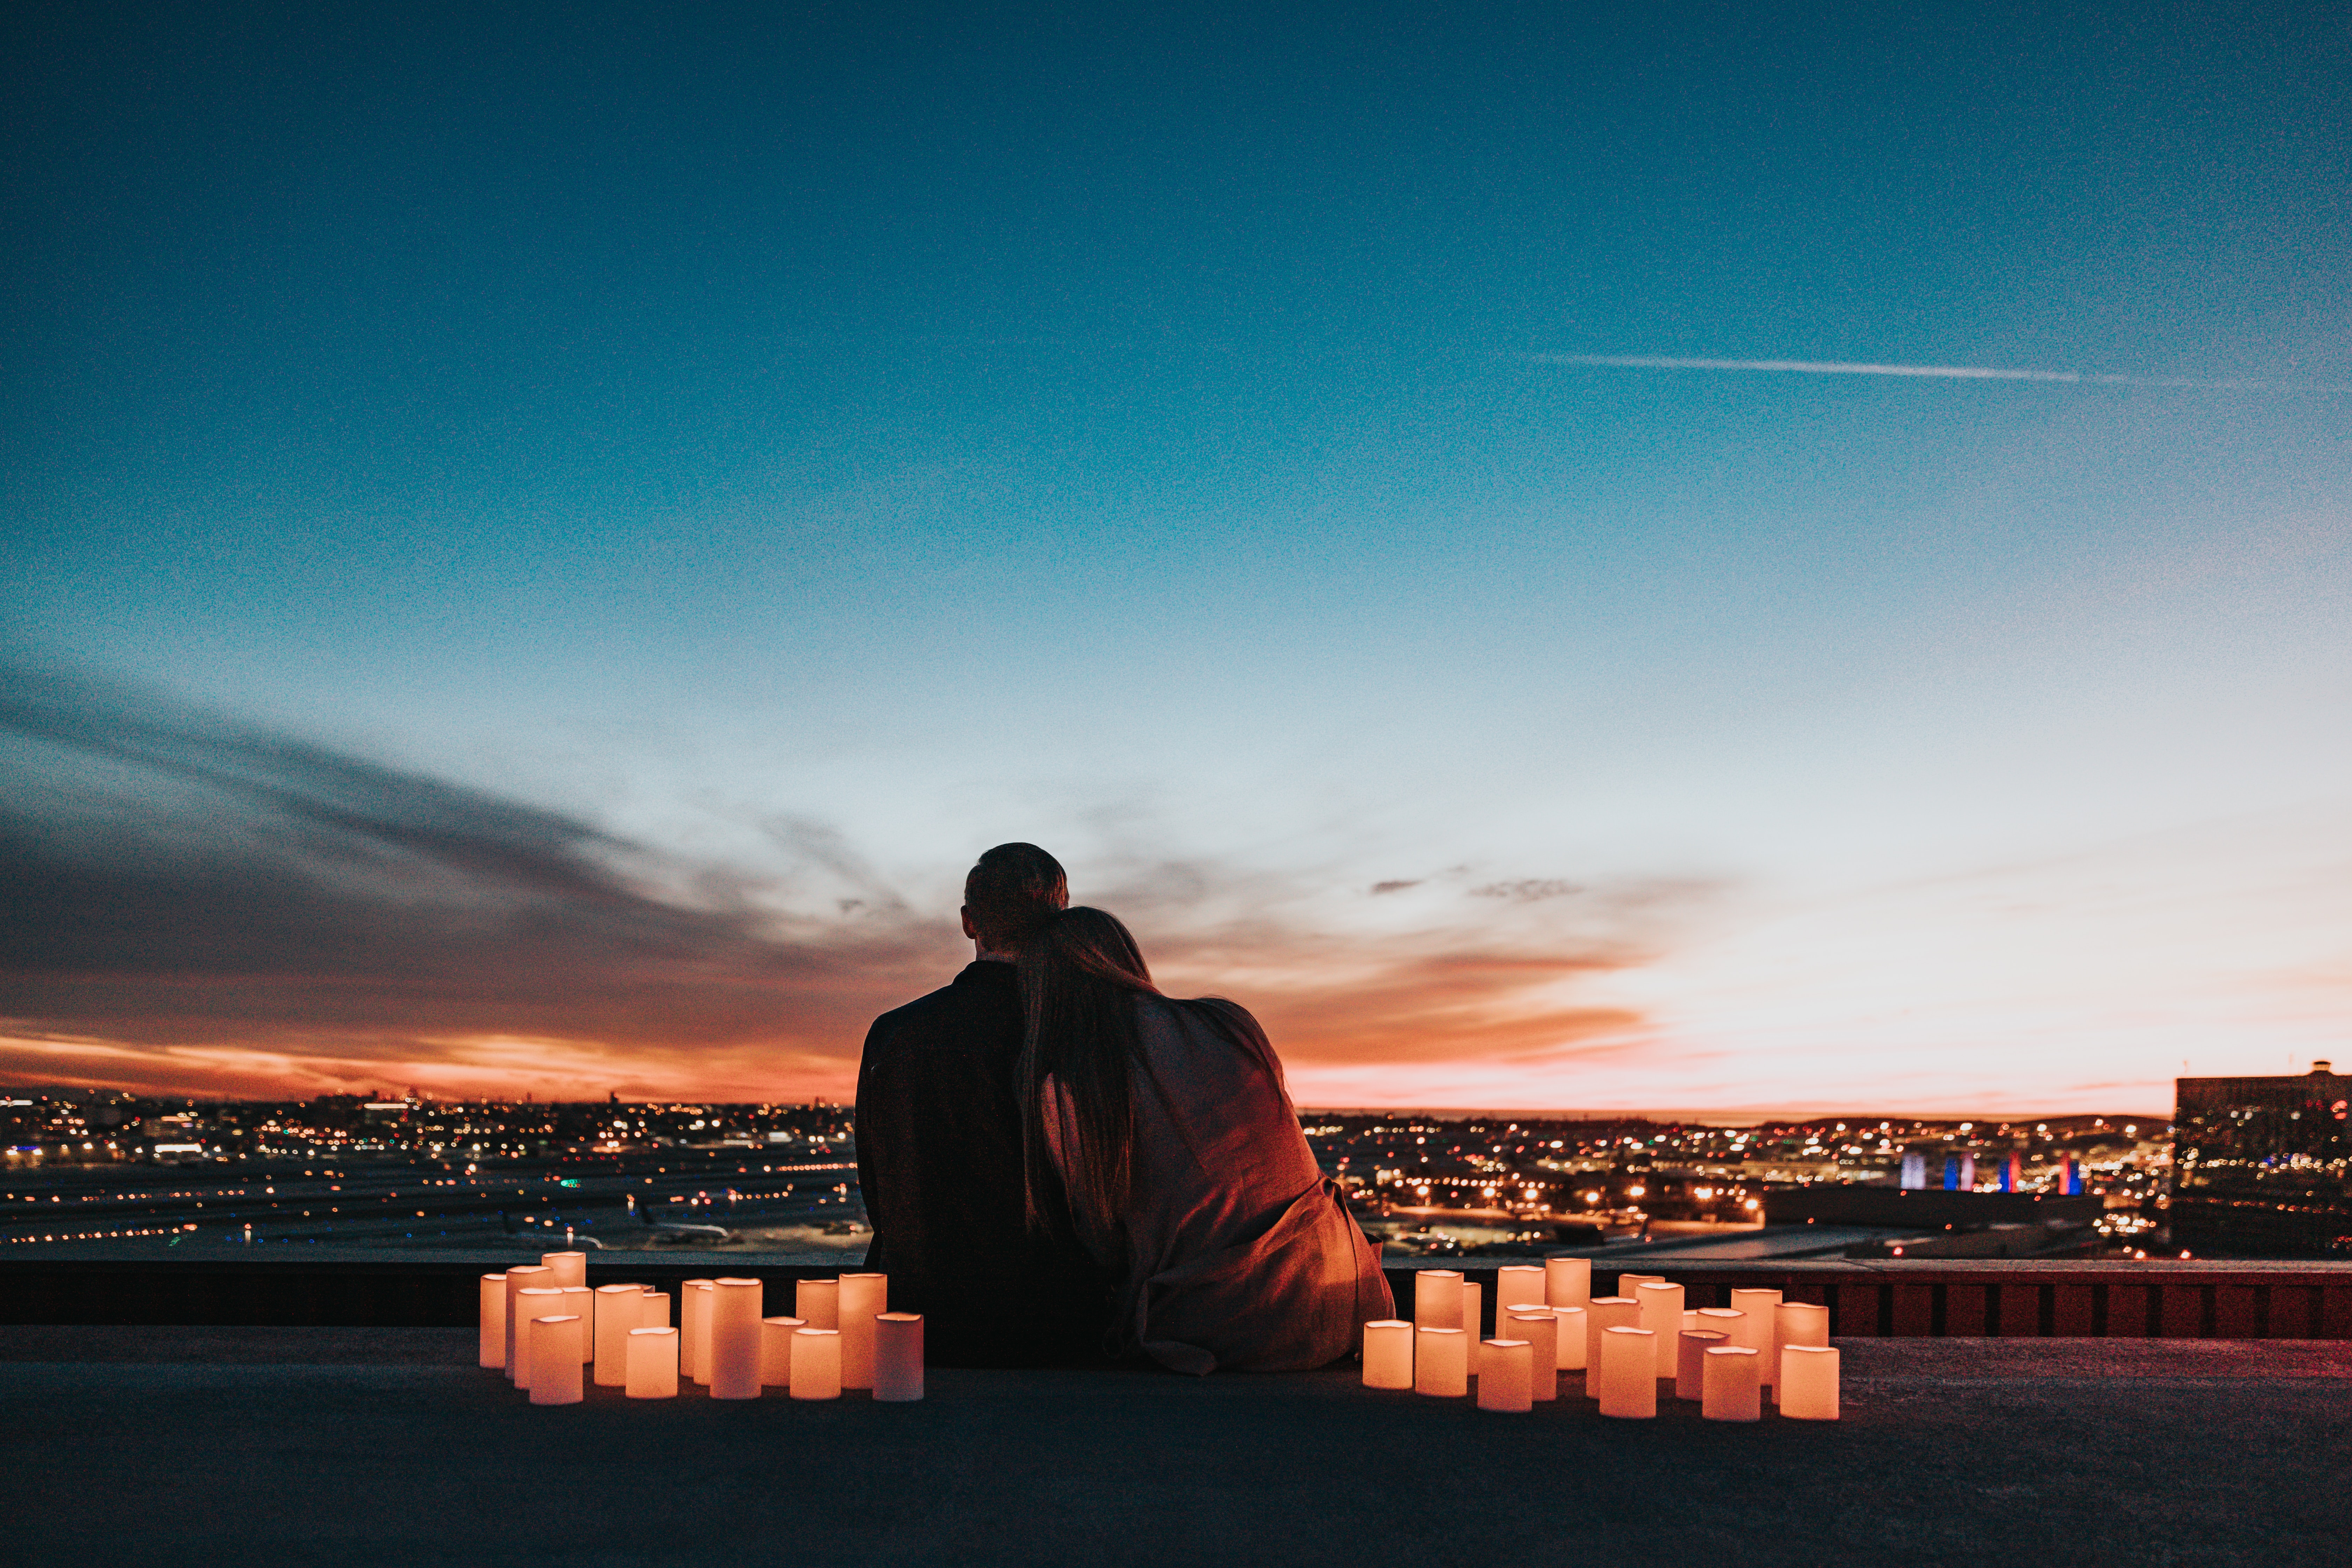 A couple surrounding by candles looking at a city. | Source: Unsplash